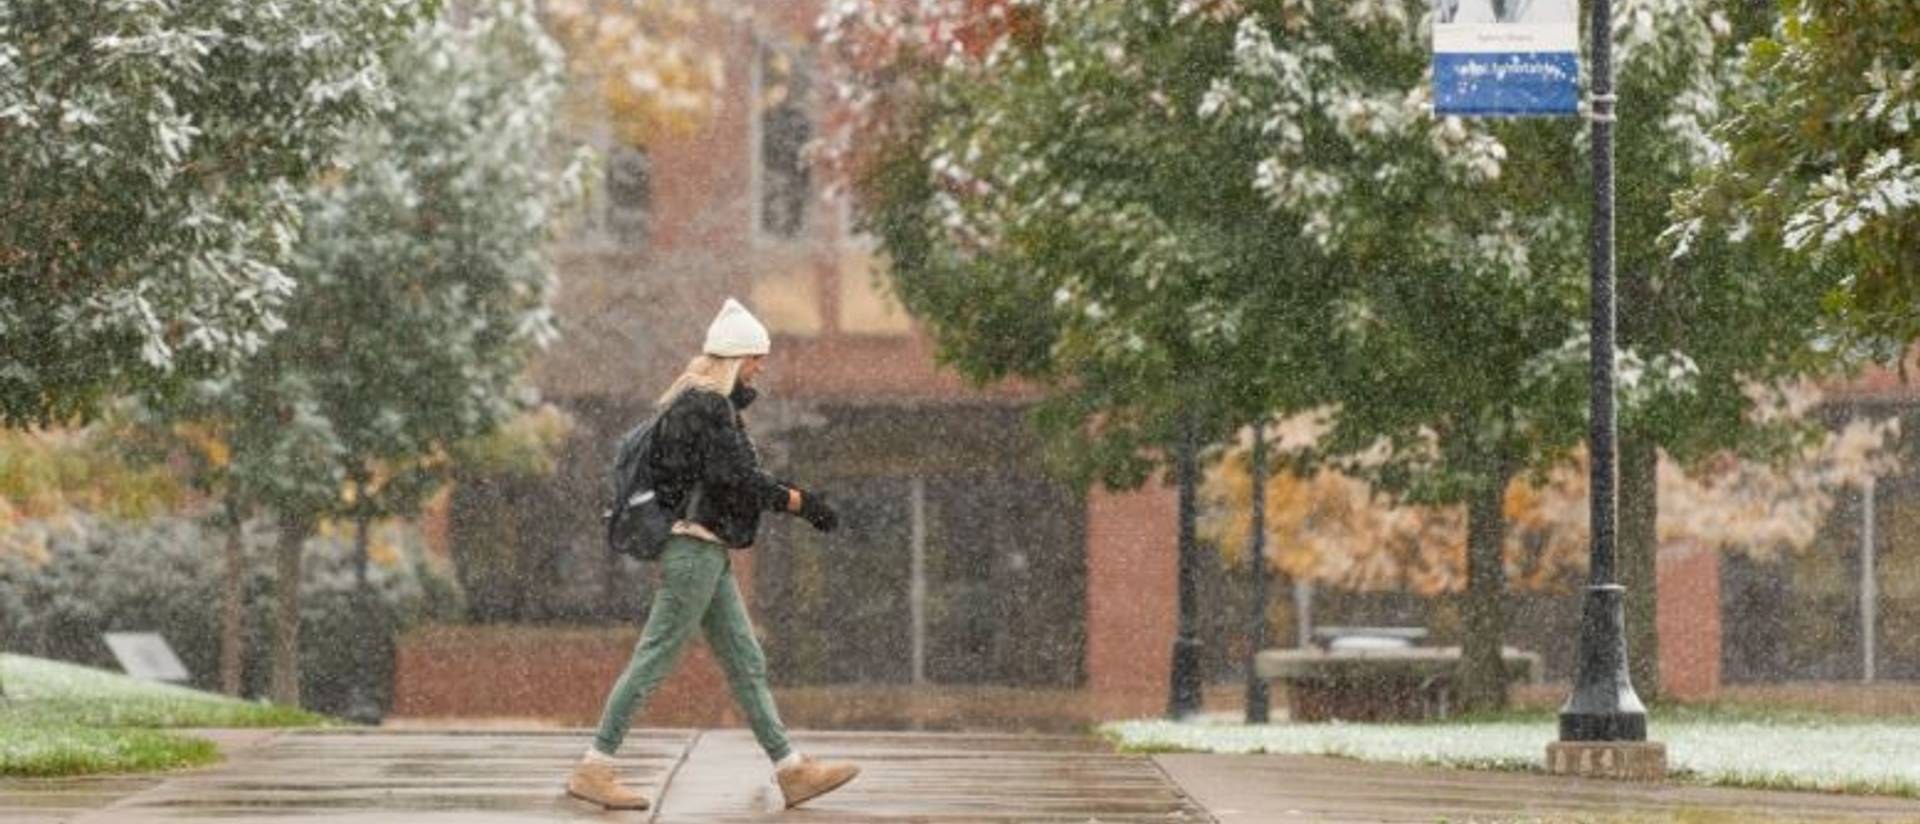 College students walking past building while snow is falling.